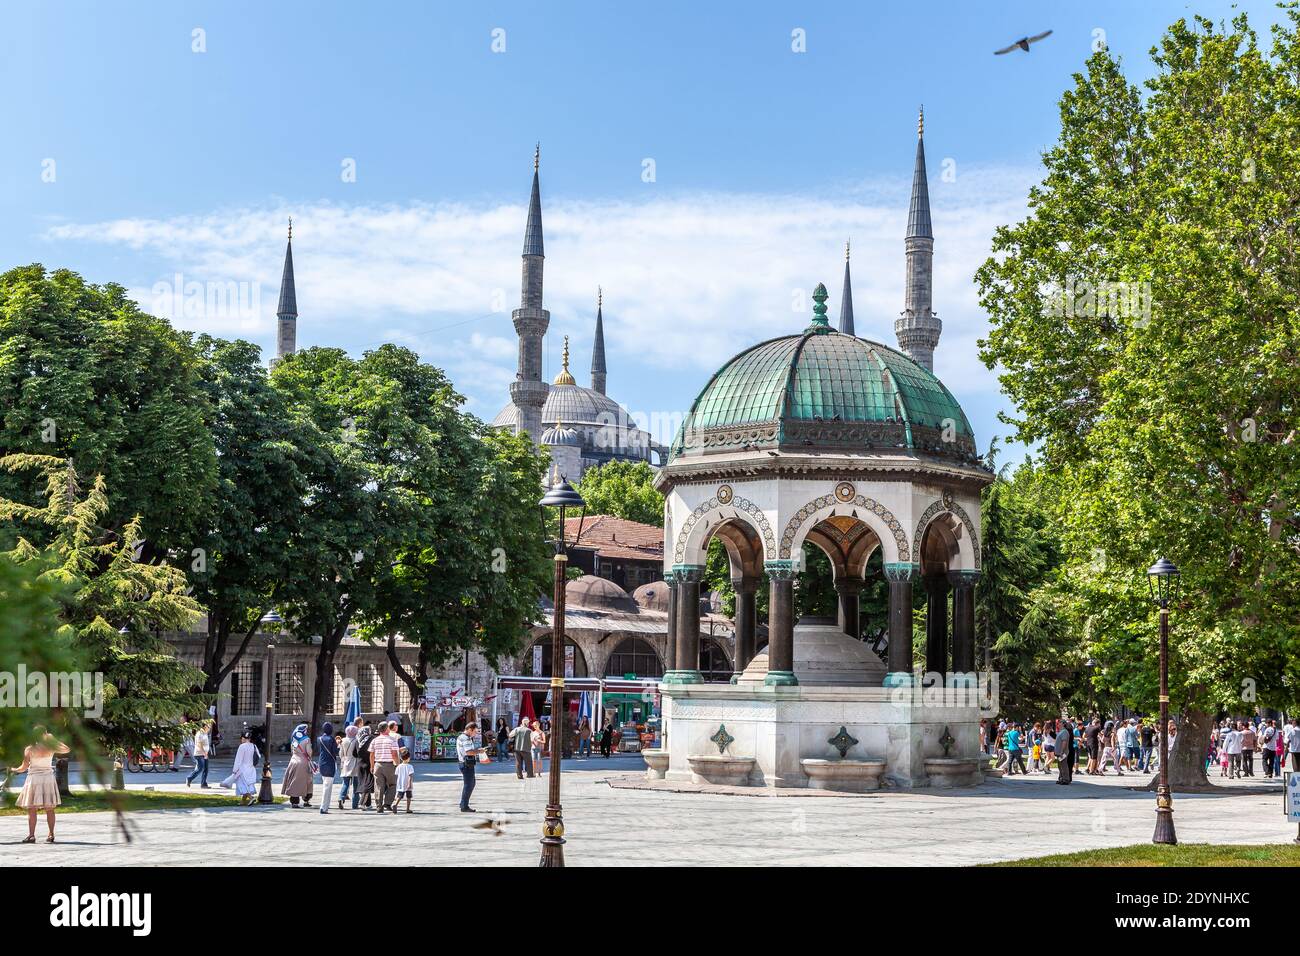 German Fountain and Sultanahmet Mosque Stock Photo